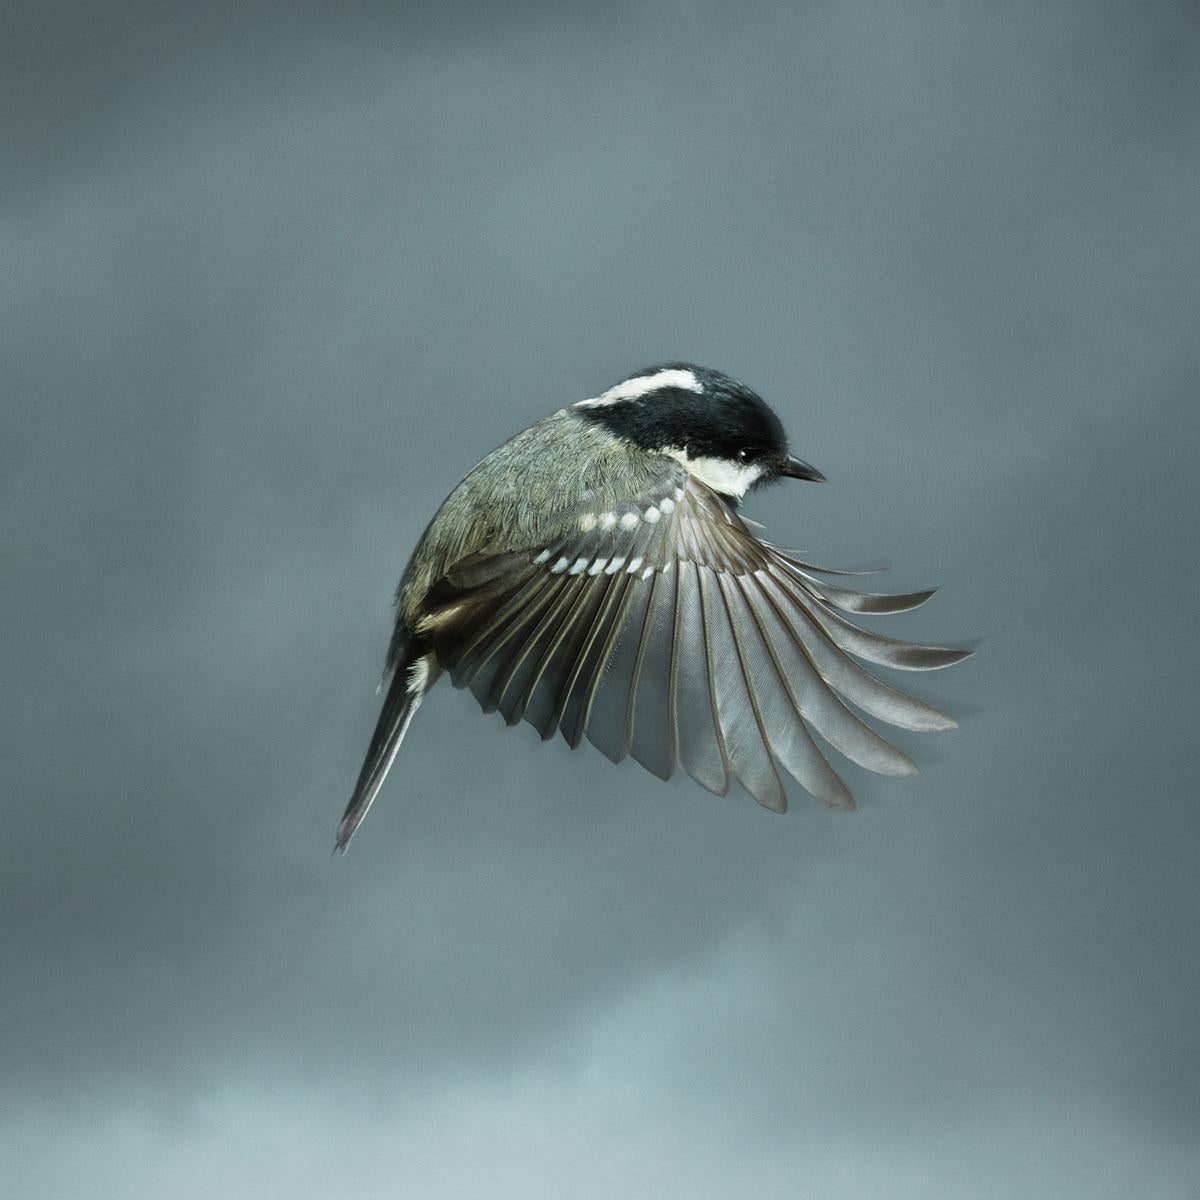 Coal Tit is part of the In Flight collection, a series of portraits of the wild birds taken in the gardens of Mark Harvey's home in Norfolk, England.

At a mere 9.2 grams there is an immense amount of beauty packed into this delicate little coal